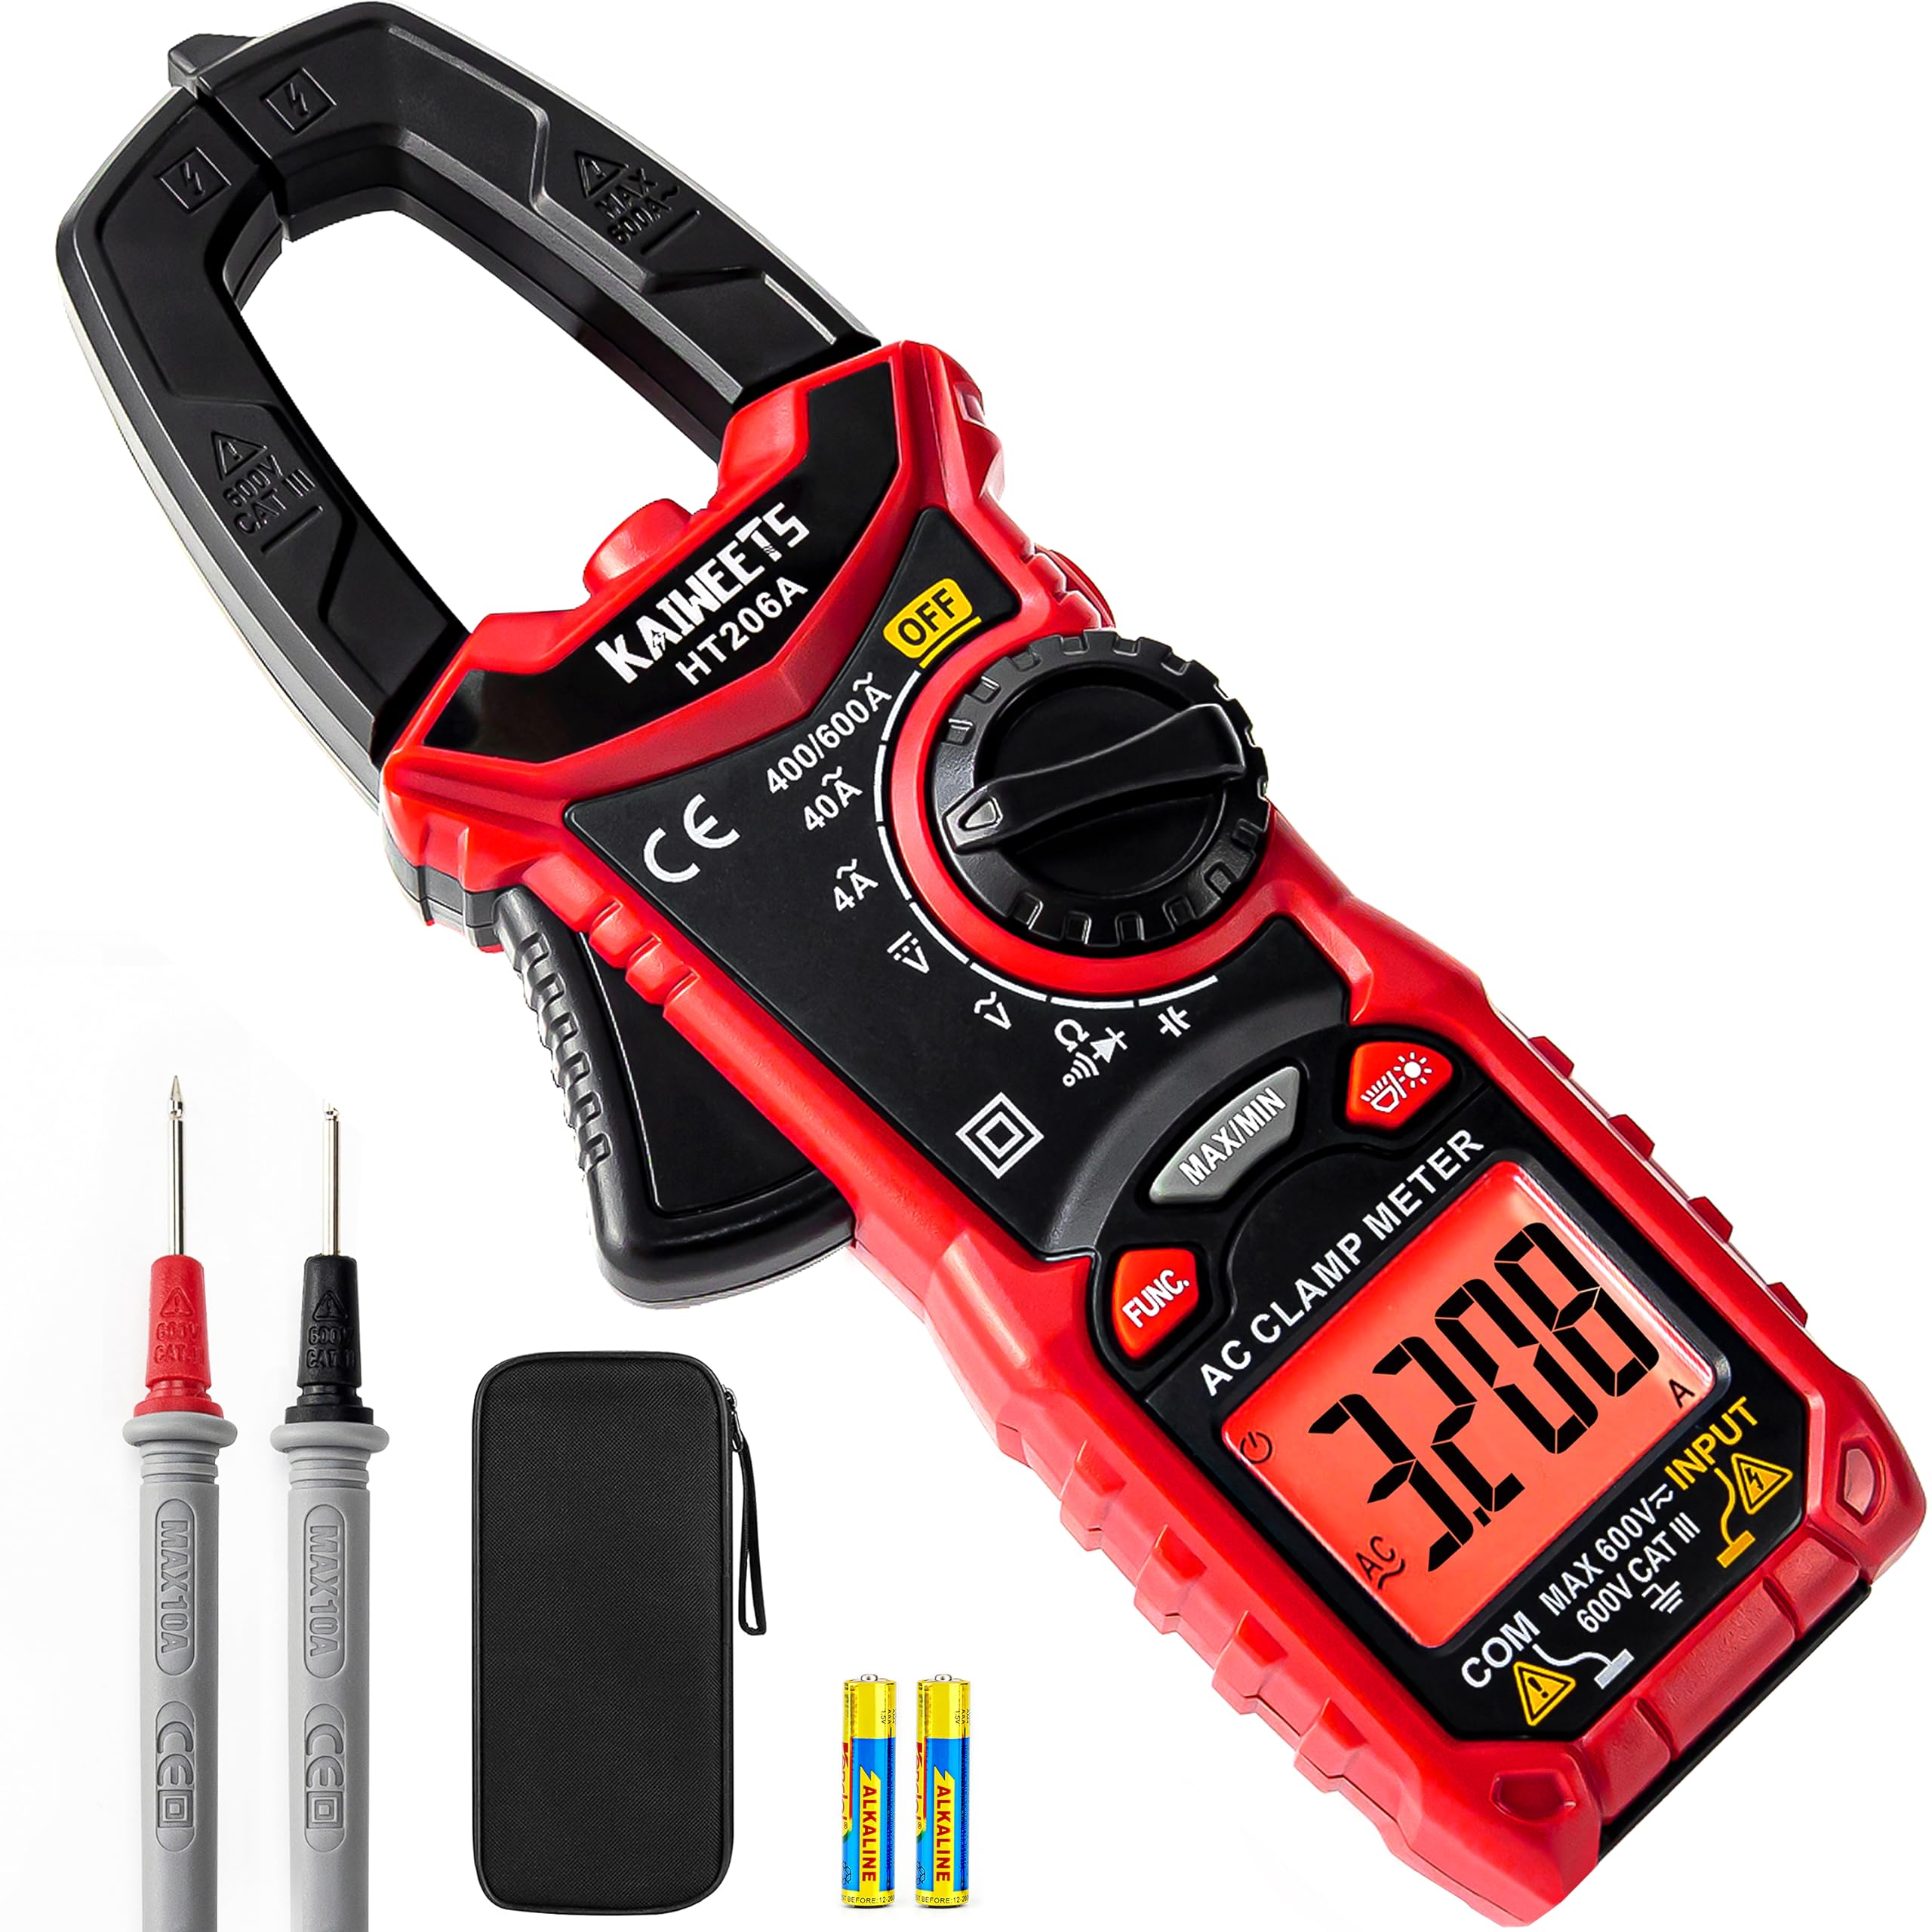 KAIWEETS Digital Clamp Meter dc/ac current - $30 at Kaiweets Direct via Amazon